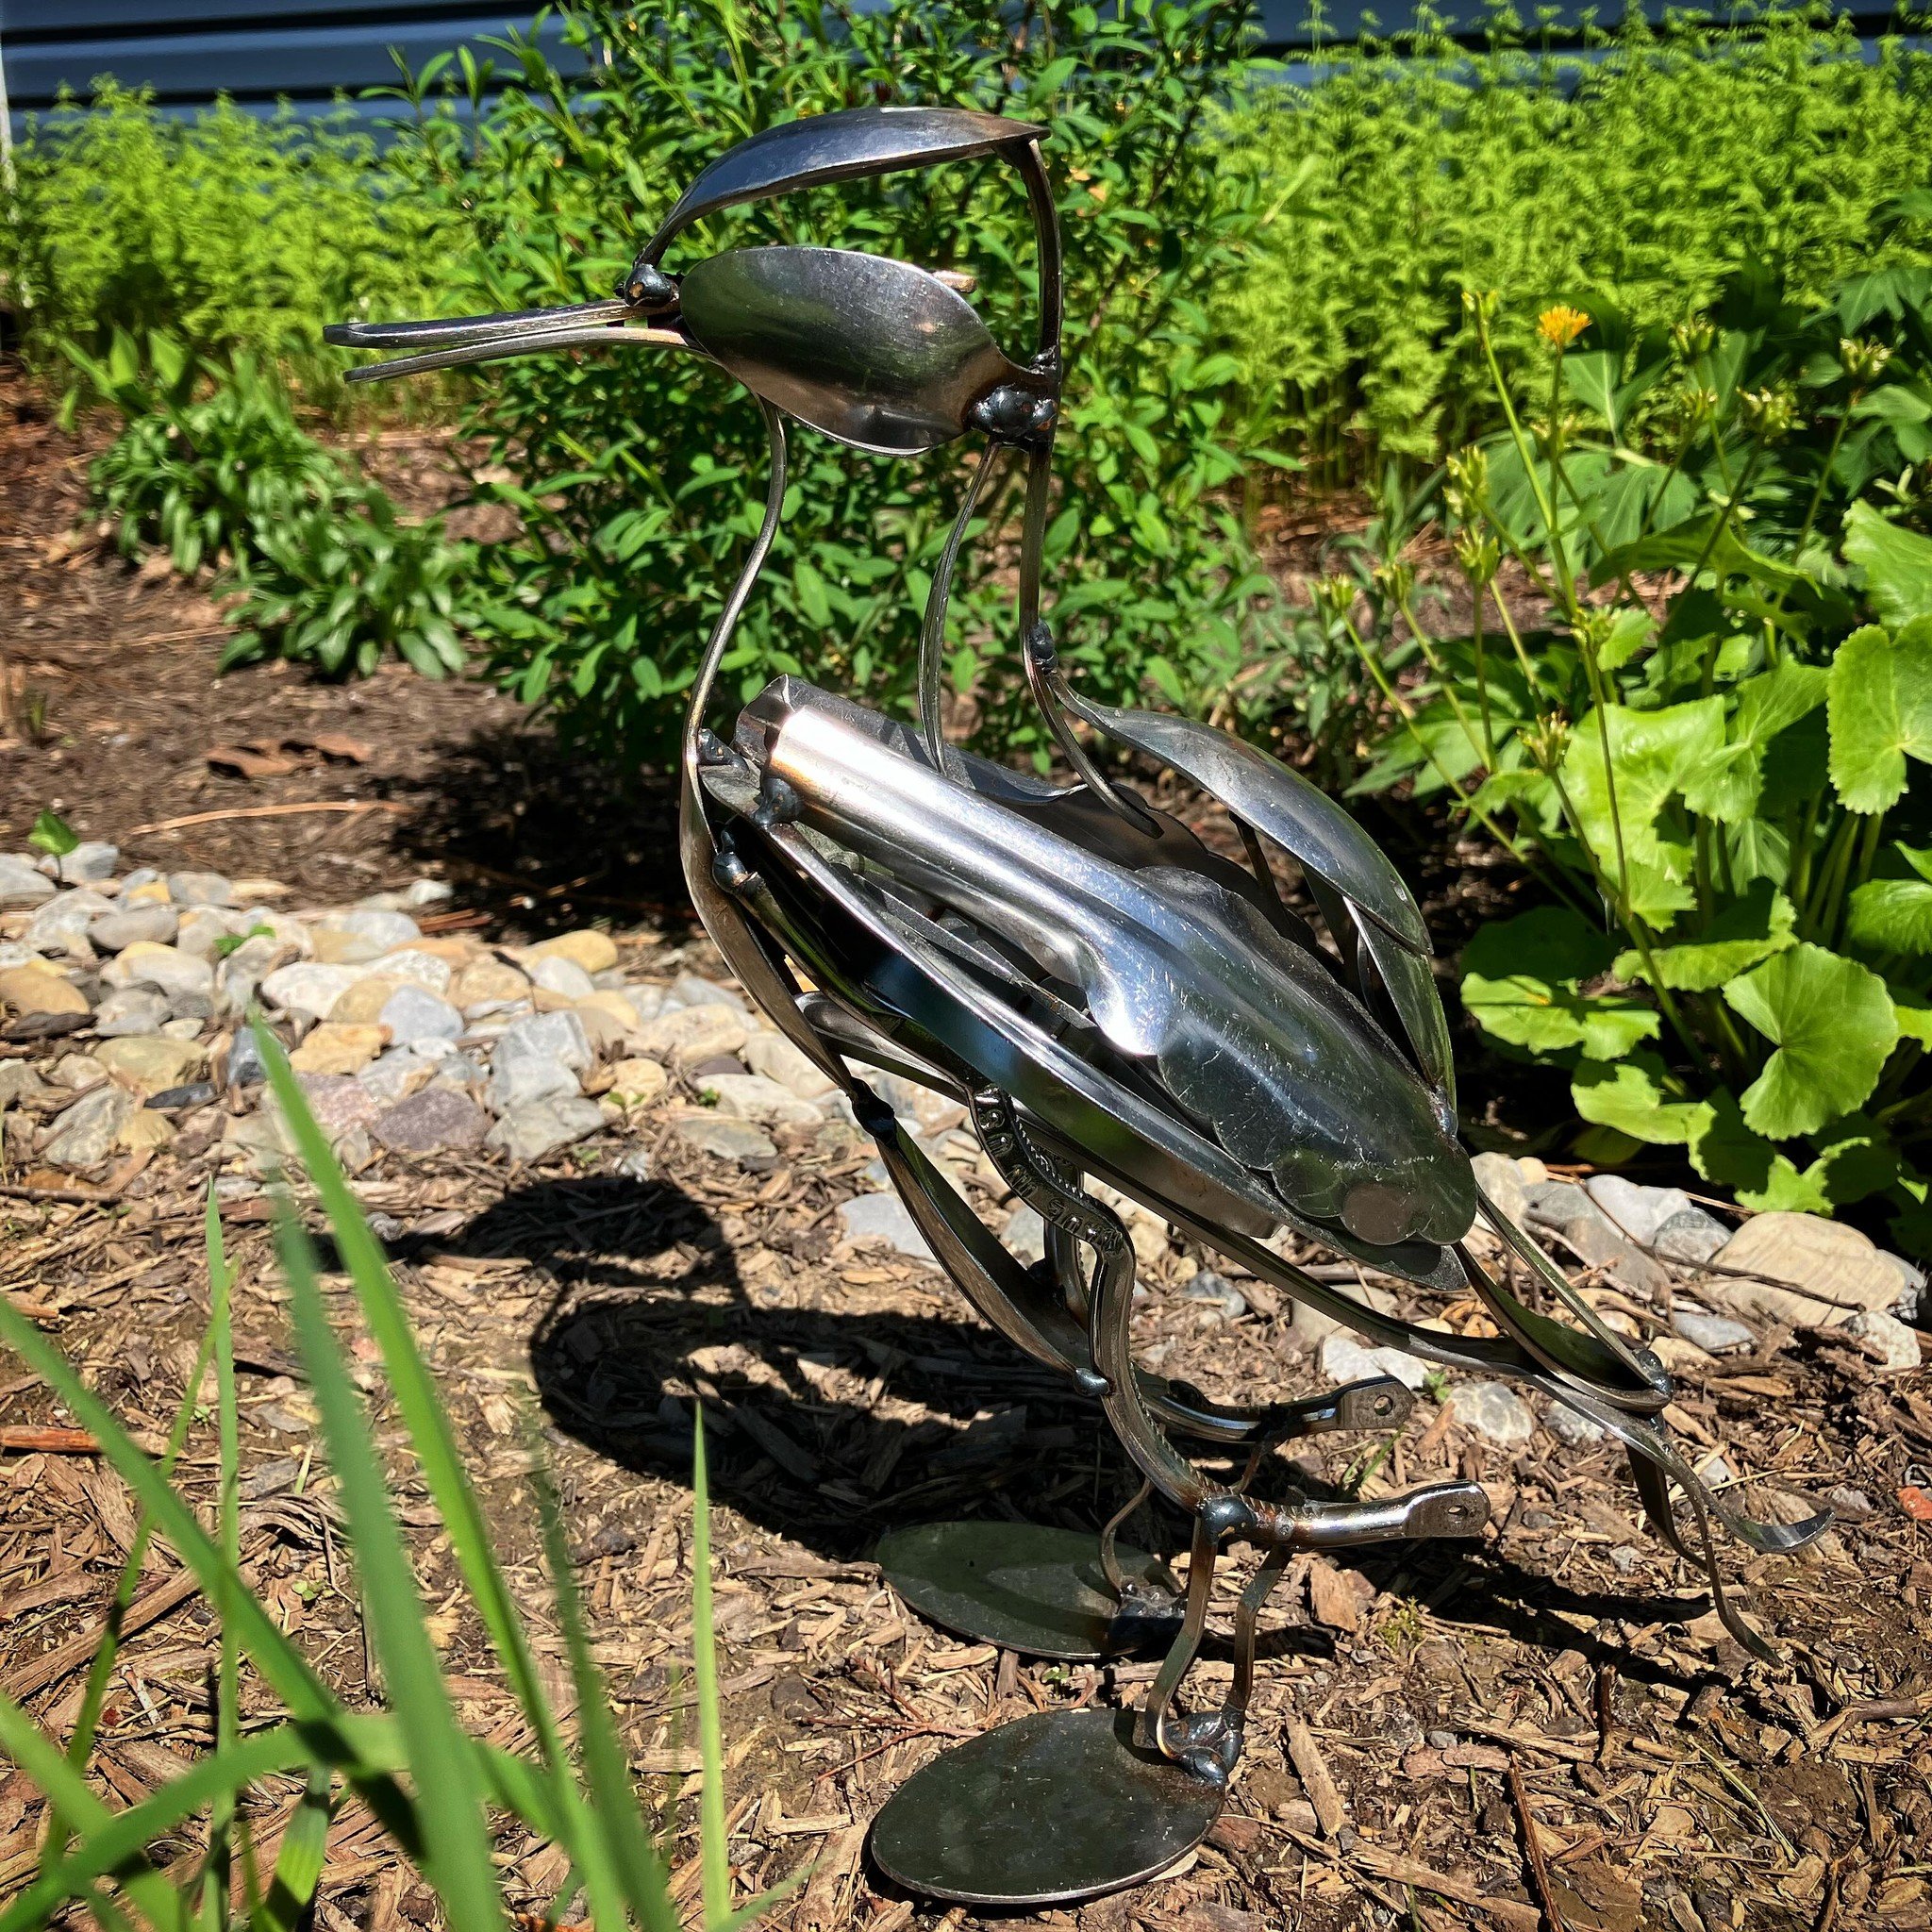 Have you ever longed for a spoon duck? 🥄🦆

Officially introducing this beauty by @c.heidler_artisanry that our director @jessejelsma picked up last weekend at the Lewisburg Arts Festival.

Yet another SU Press mascot? 

#lewisburg #art #artistsonin